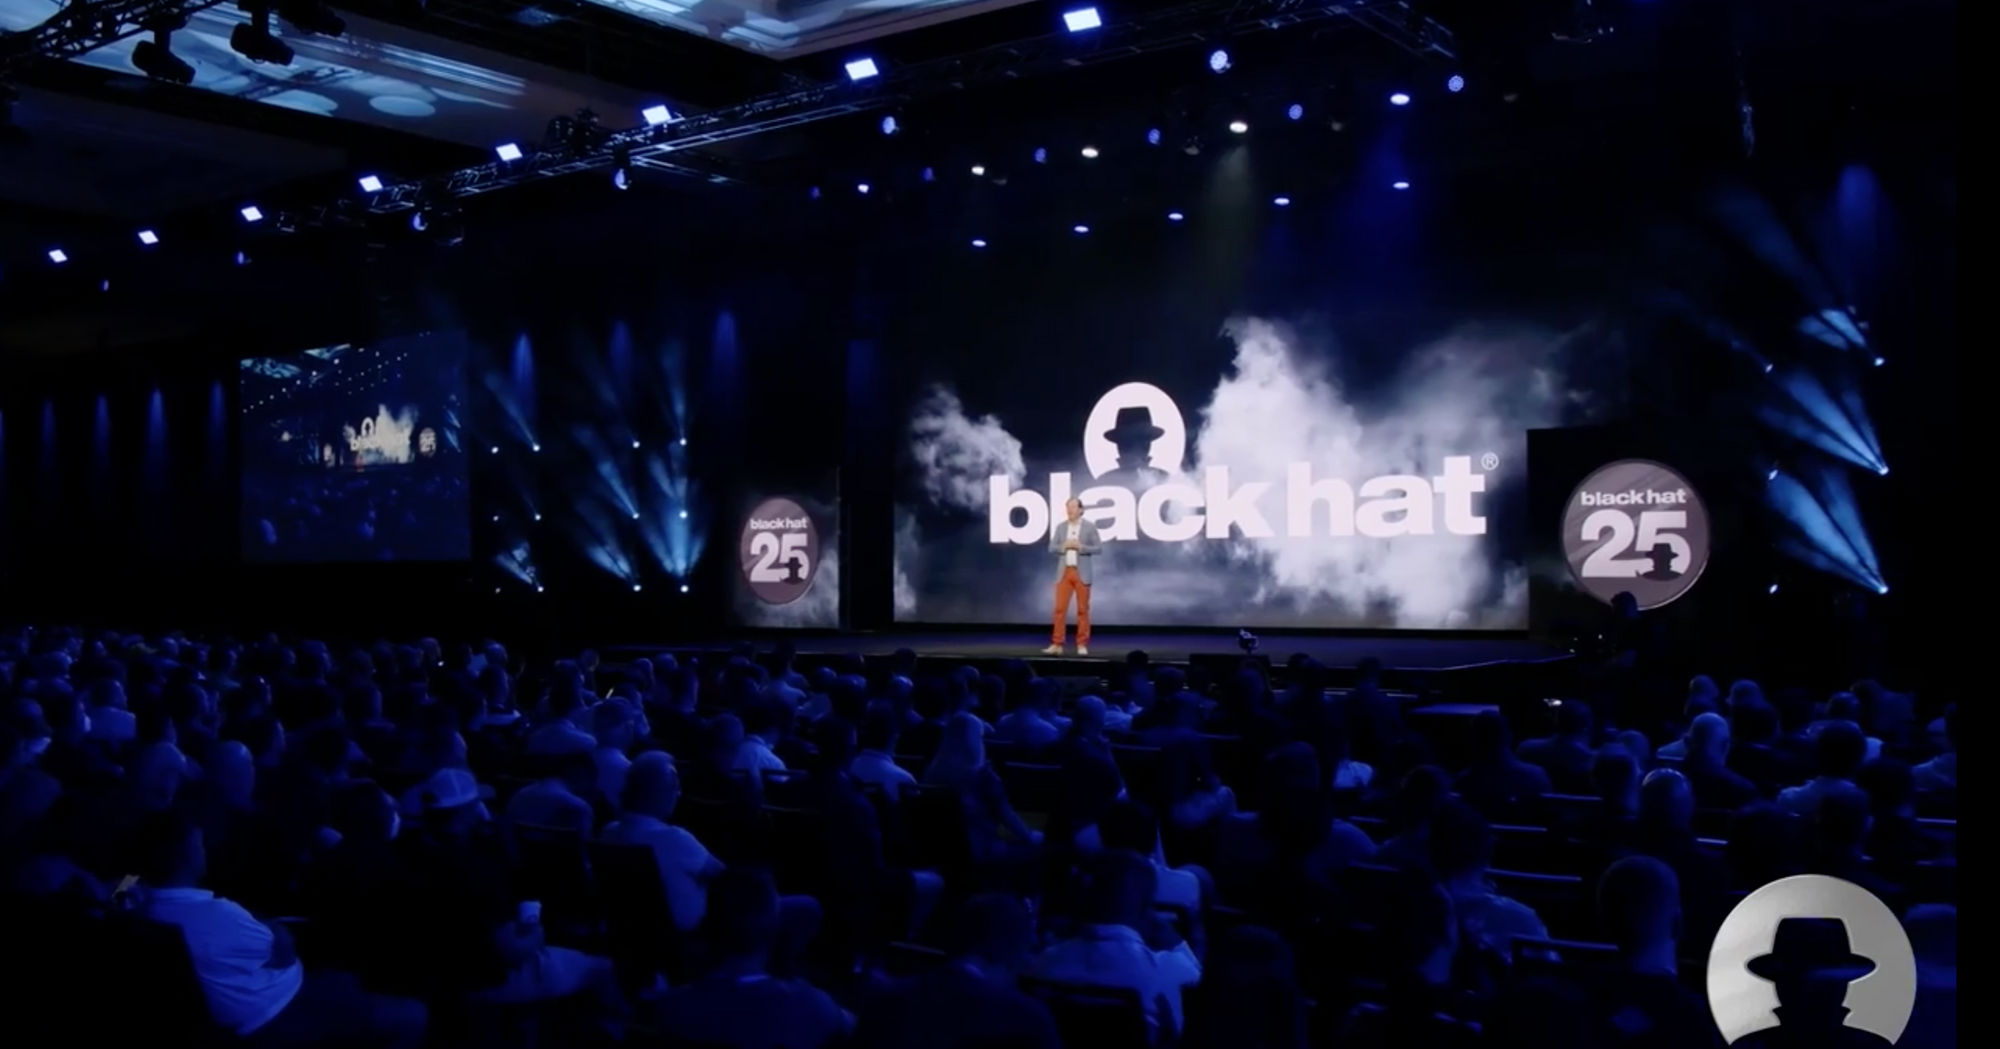 Black Hat 25 – What you need to know